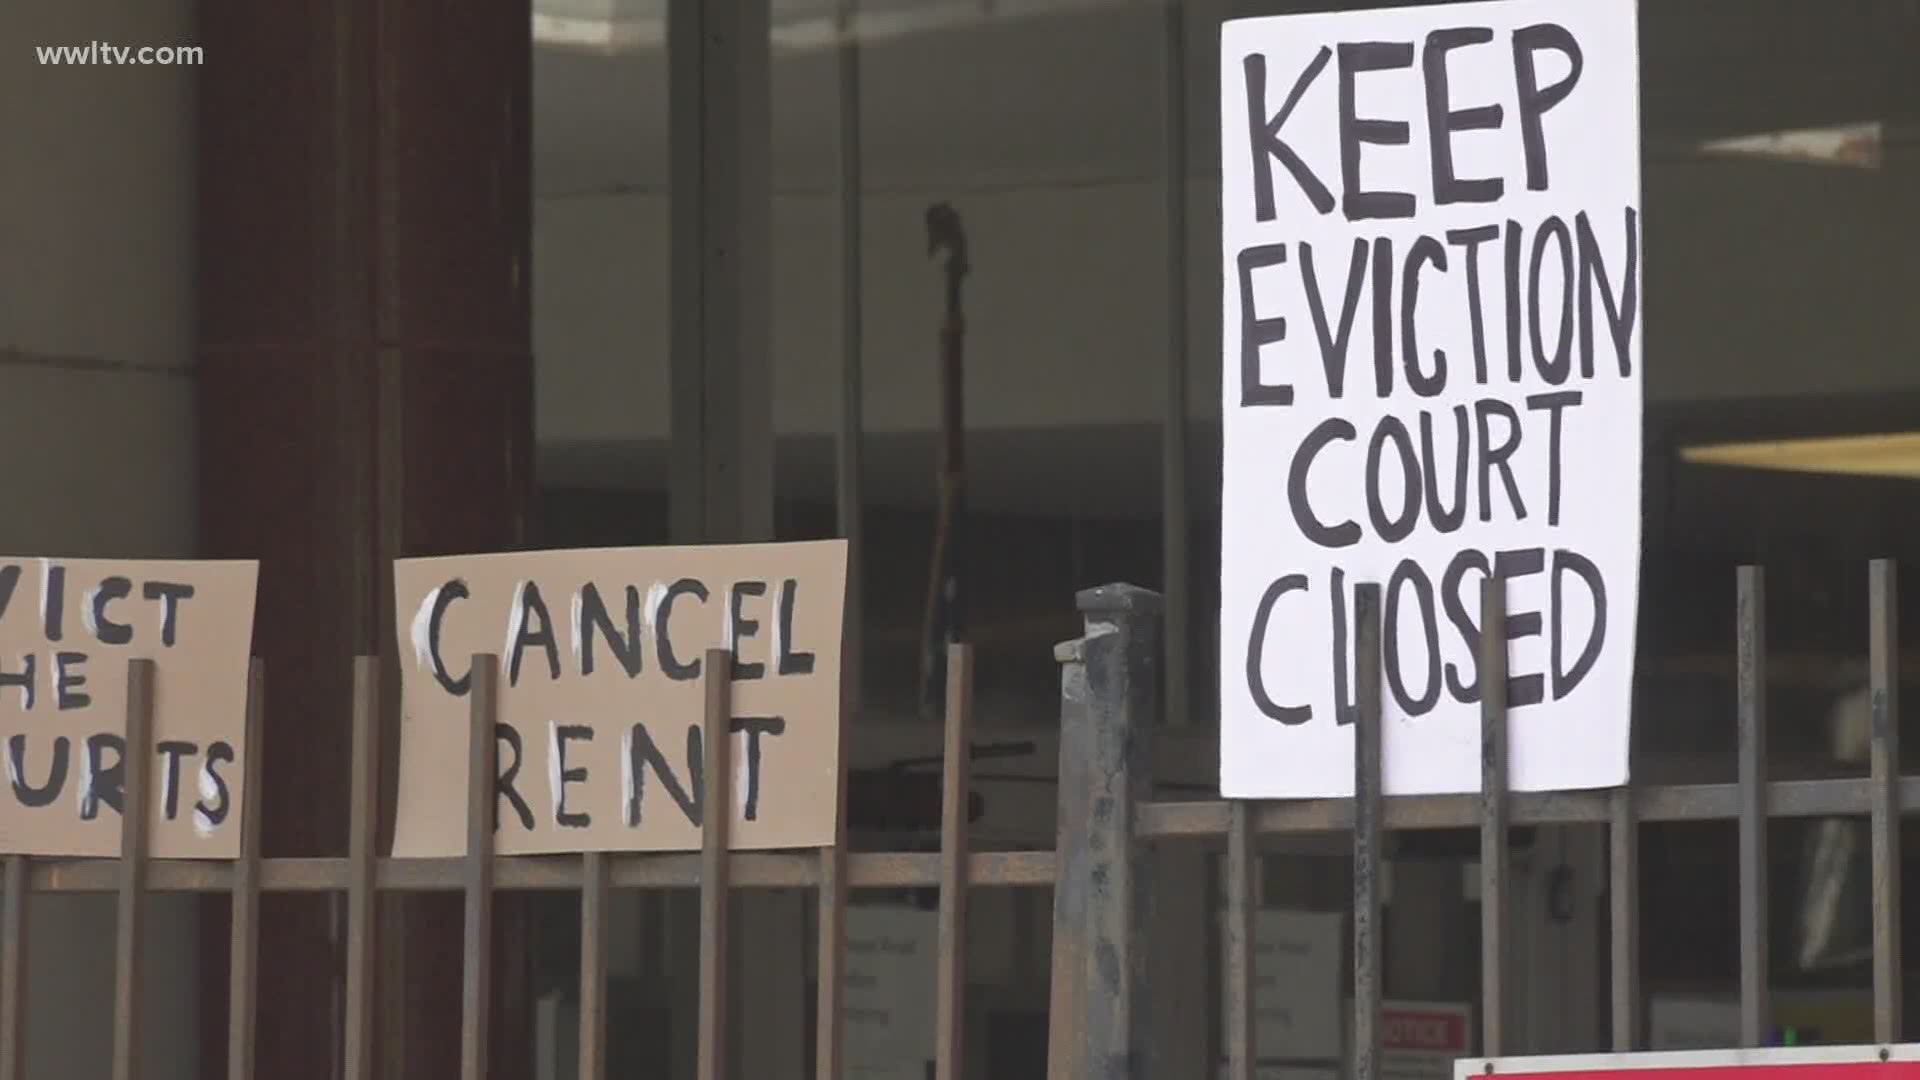 A group of protesters blocked entrance to court Thursday in New Orleans, protesting against evictions being allowed again.